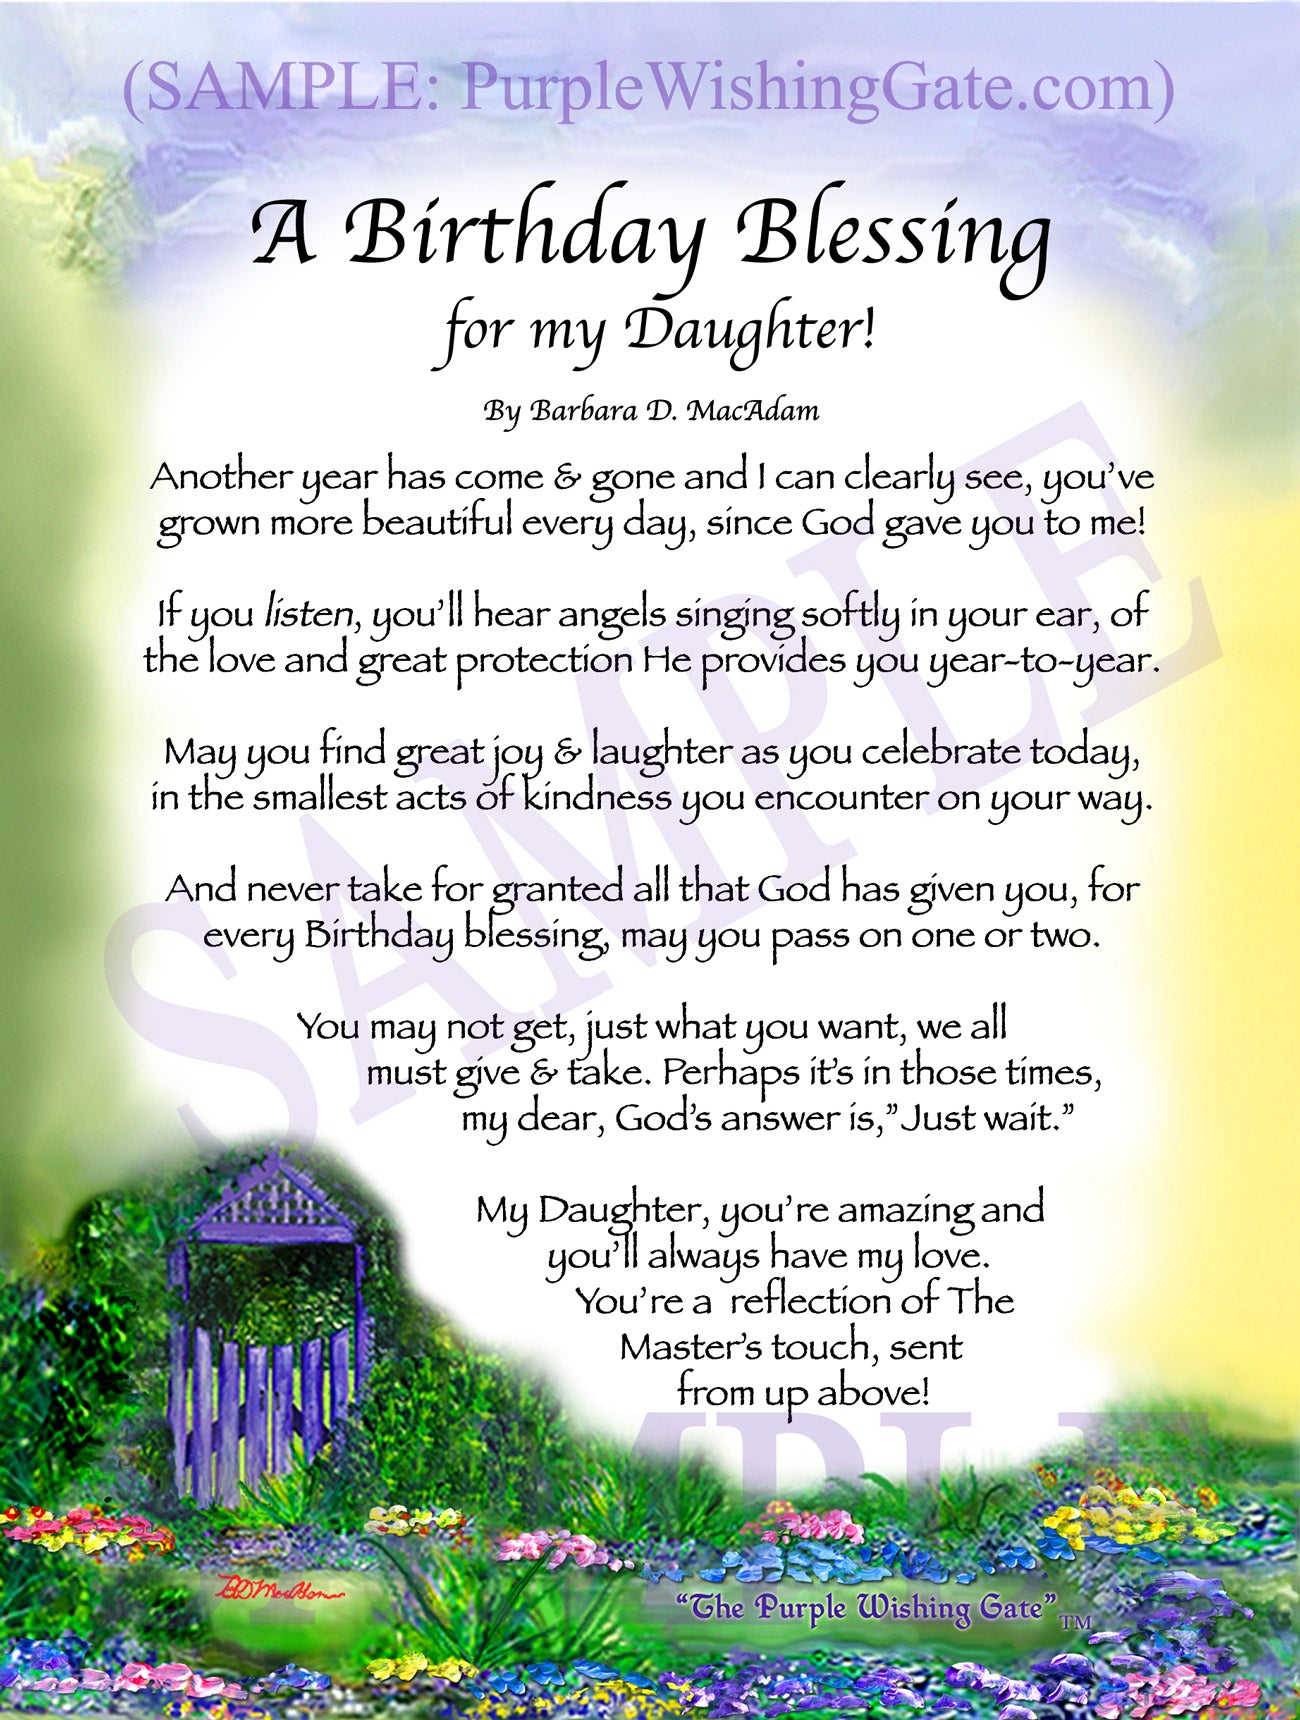 BLESSING FOR MOTHER TO BE: Framed, Personalized Gift